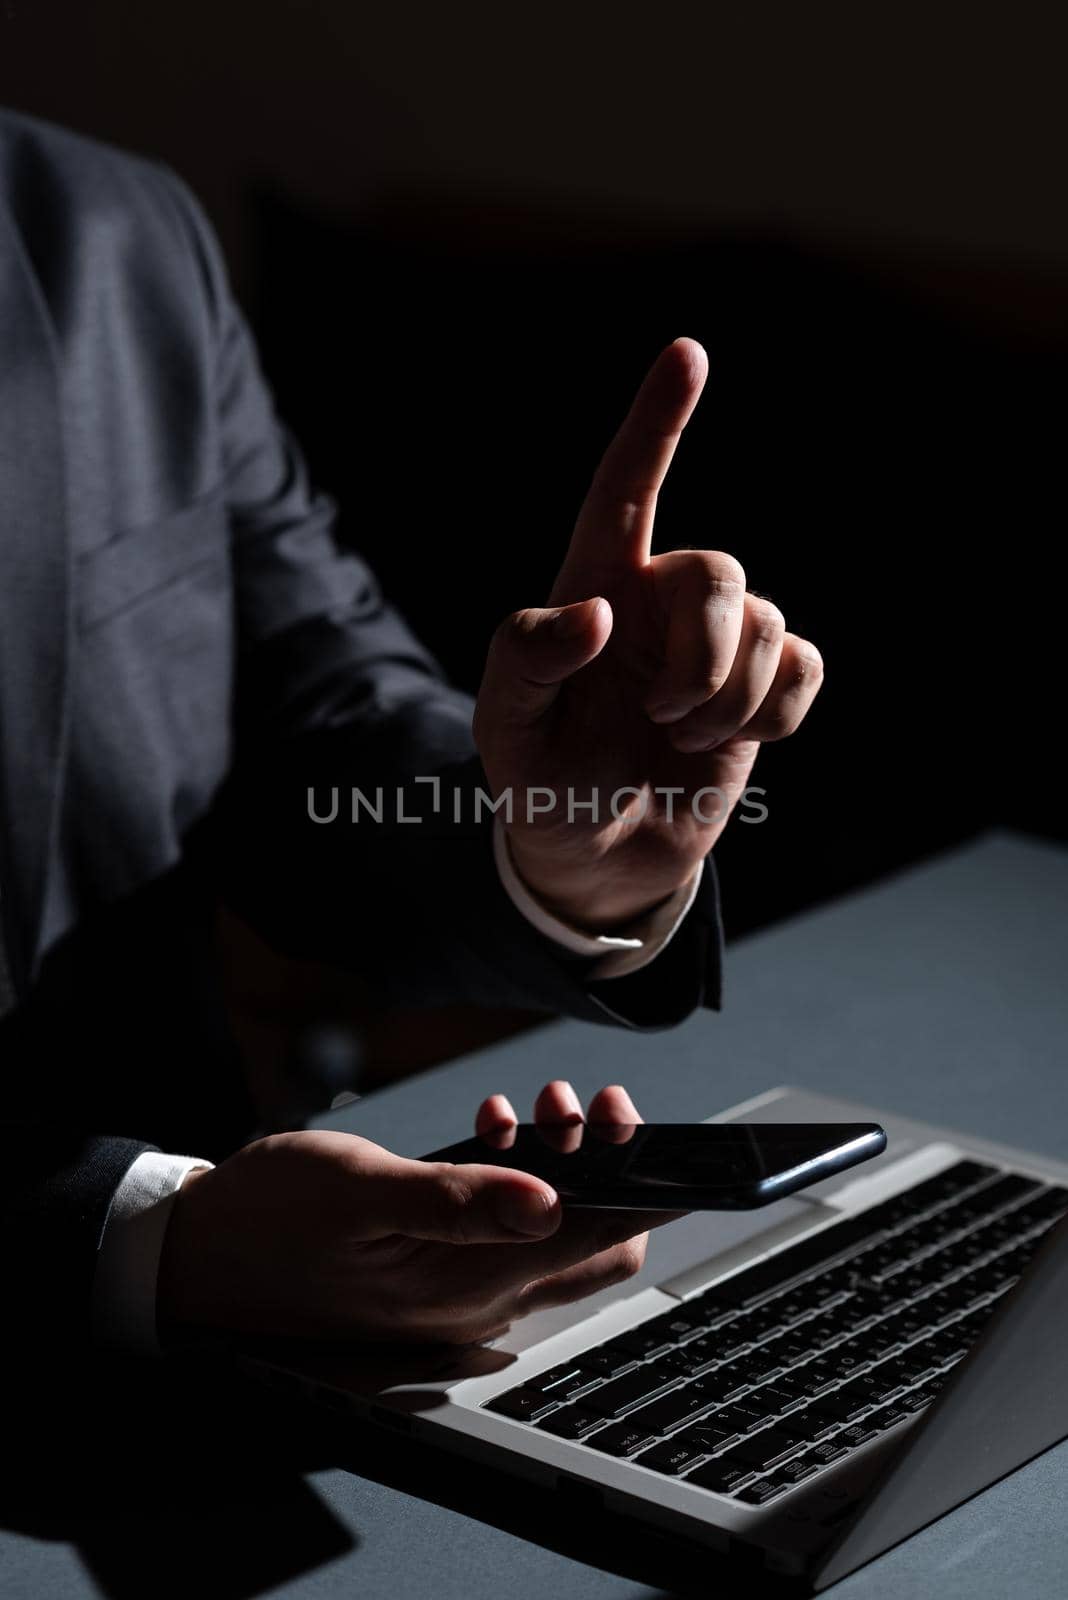 Businessman Holding Mobile Phone In Hand And Pointing With One Finger On Important Message On Desk With Lap Top. Man Having Cellphone And Presenting New Ideas With One Hand. by nialowwa